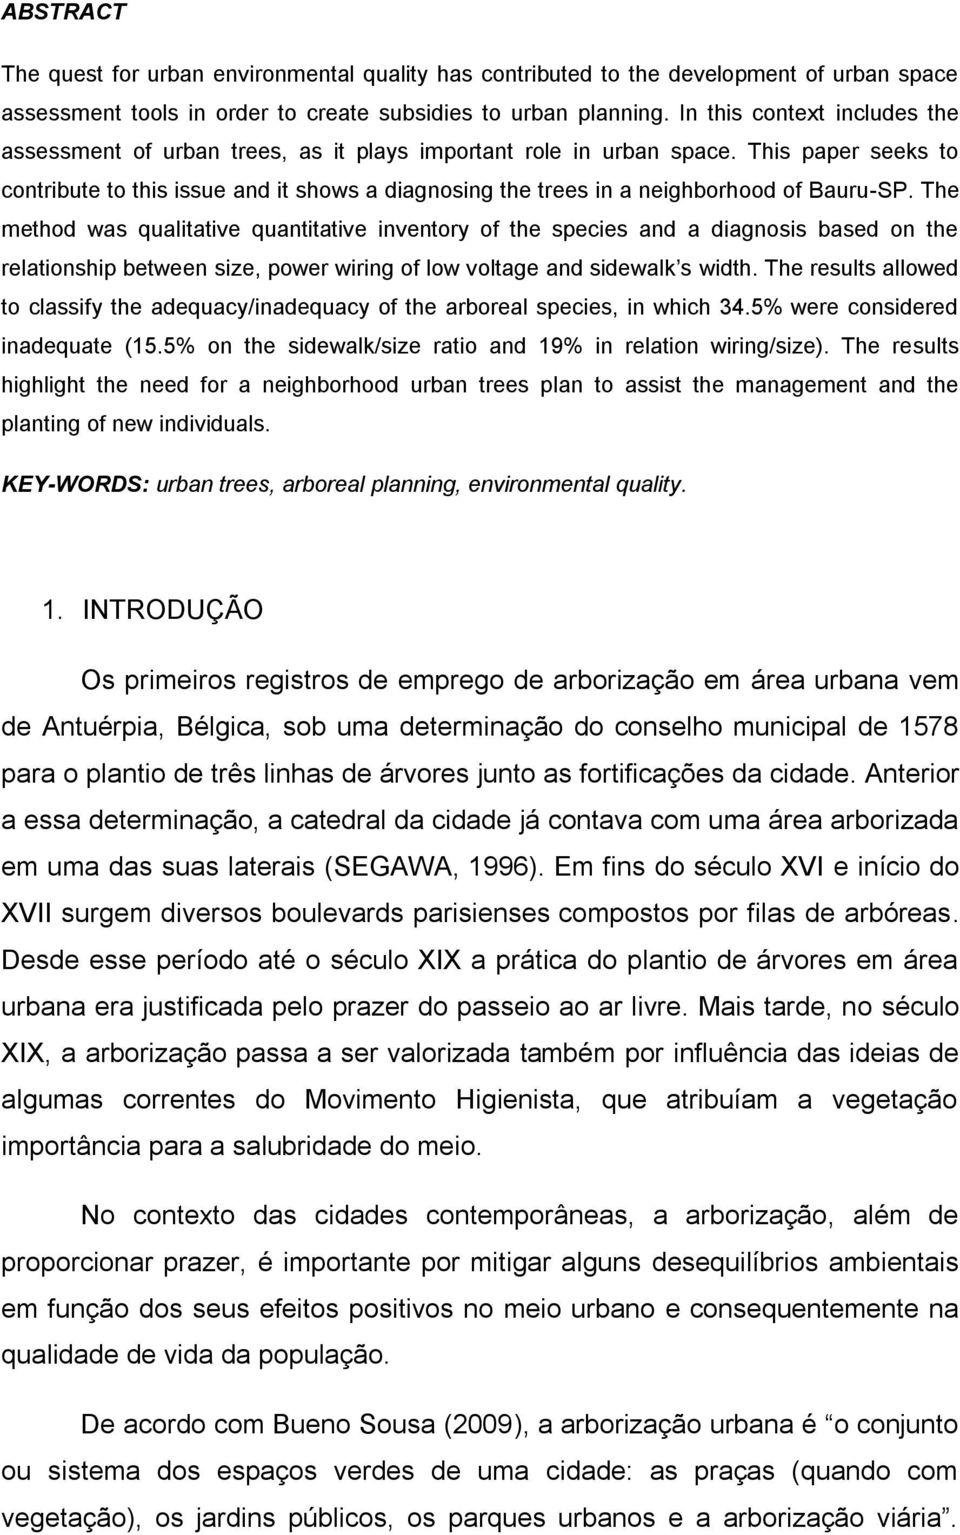 This paper seeks to contribute to this issue and it shows a diagnosing the trees in a neighborhood of Bauru-SP.